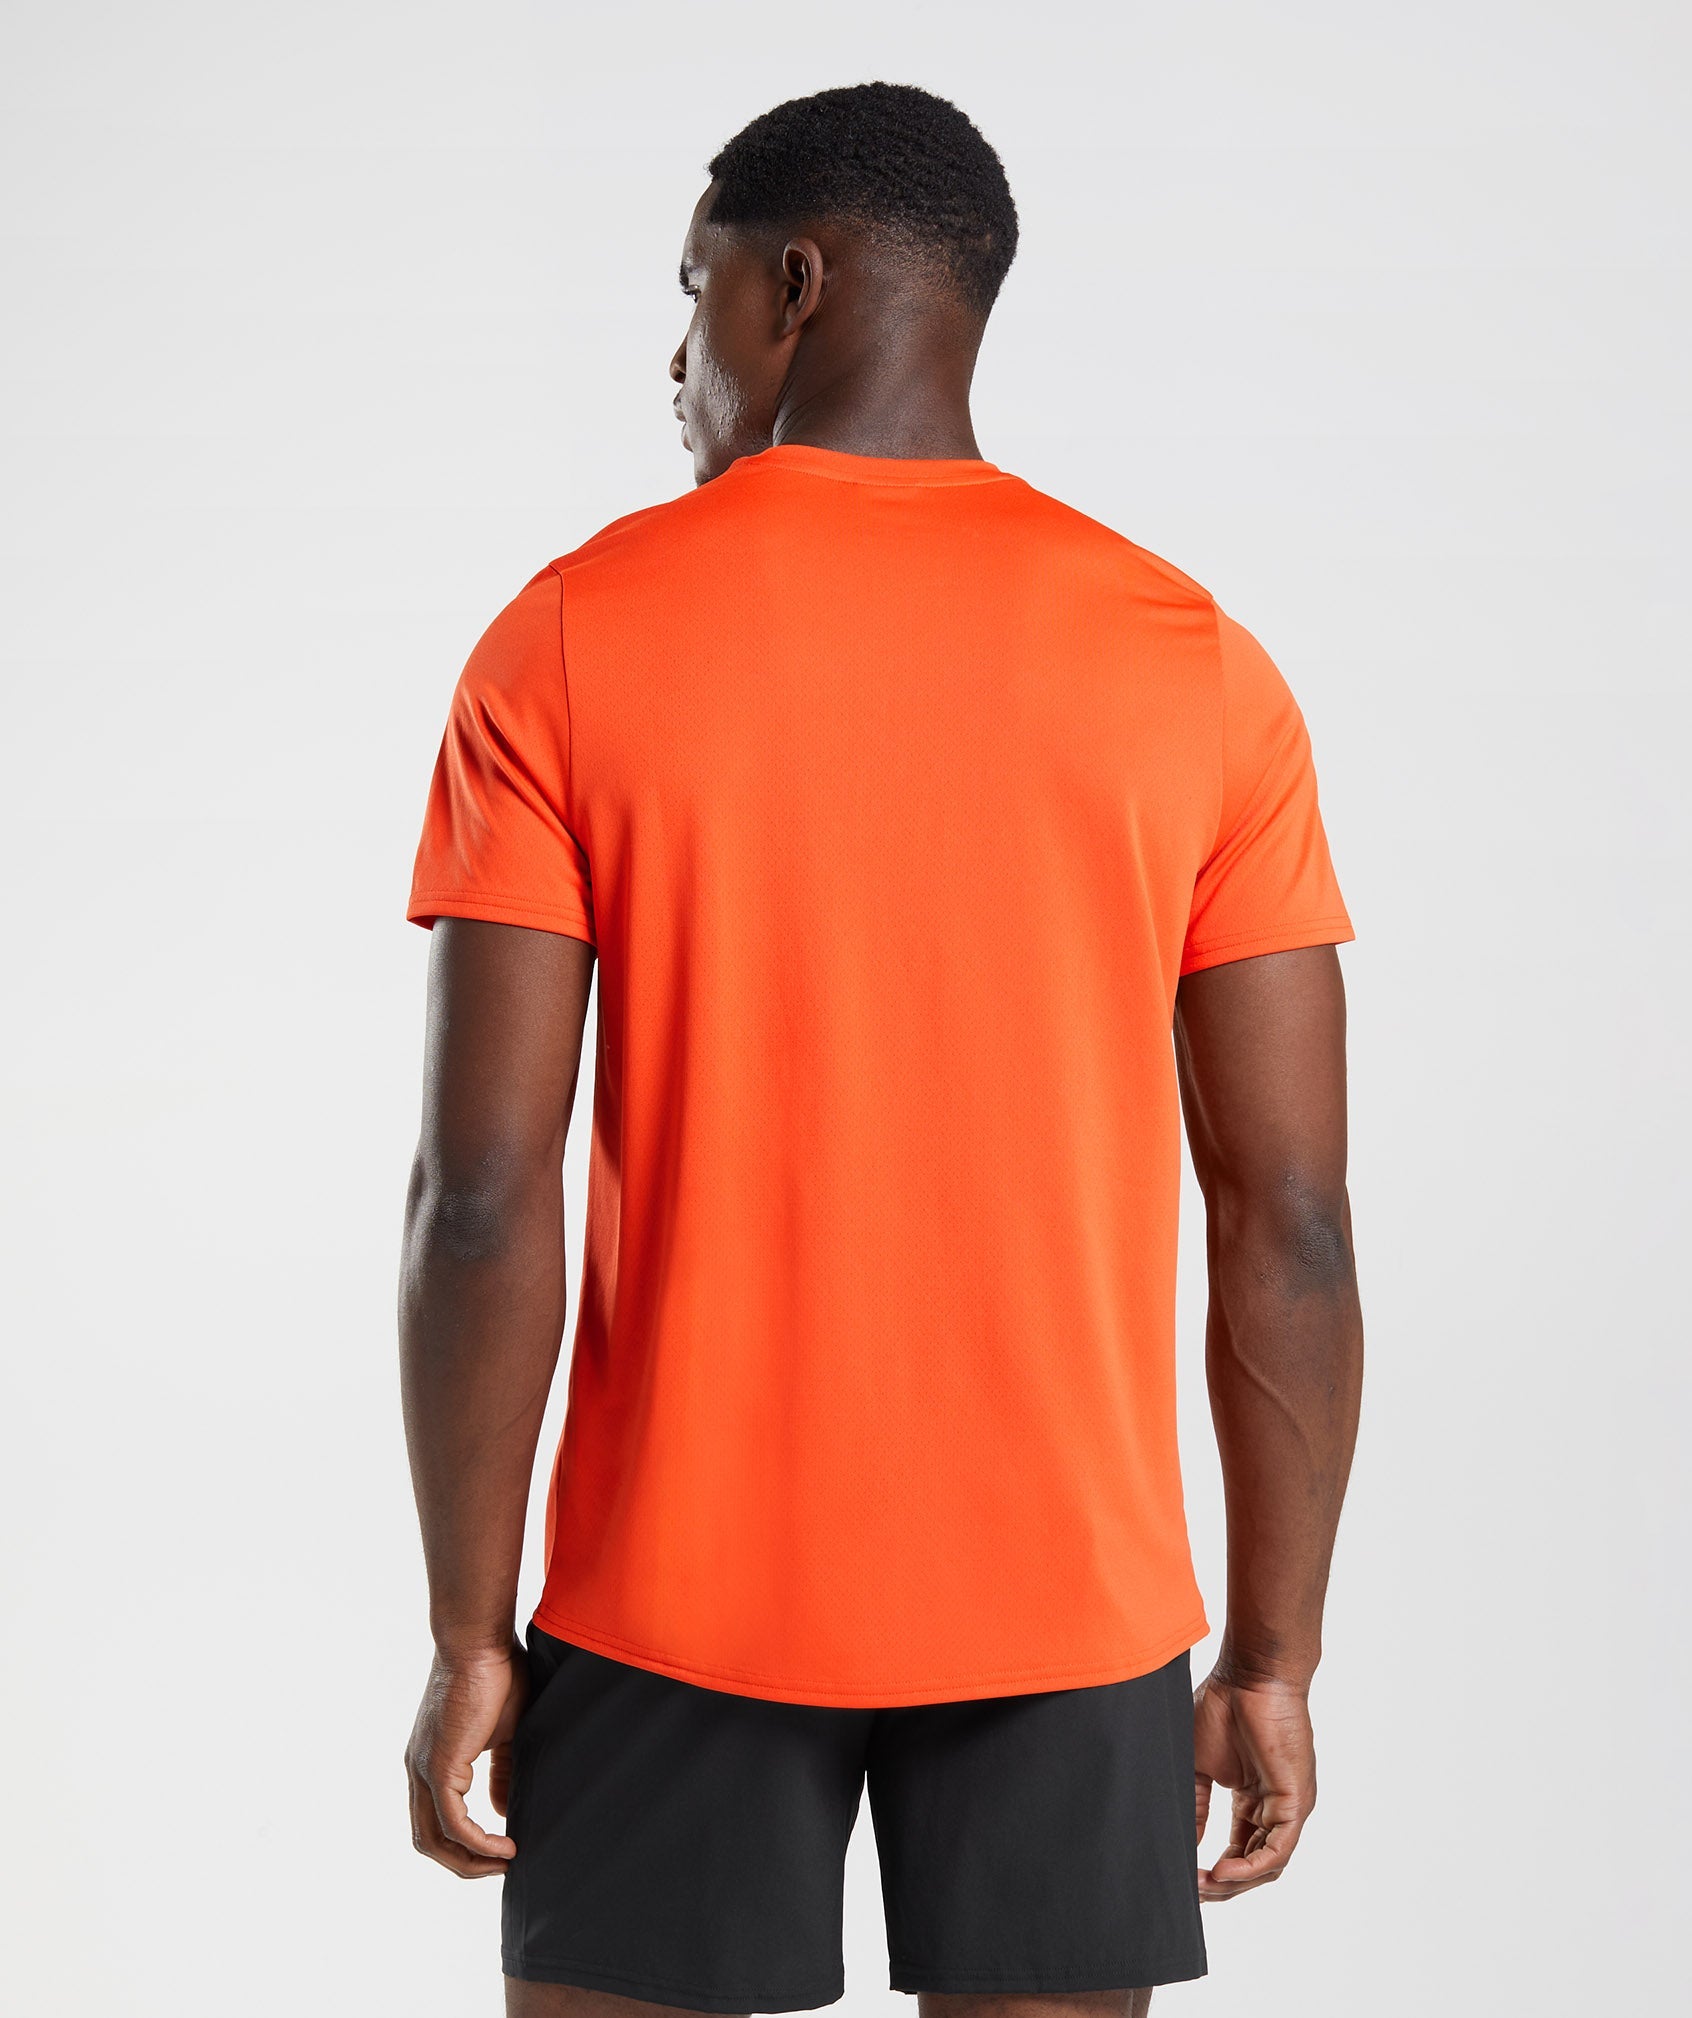 Arrival T-Shirt in Pepper Red - view 2